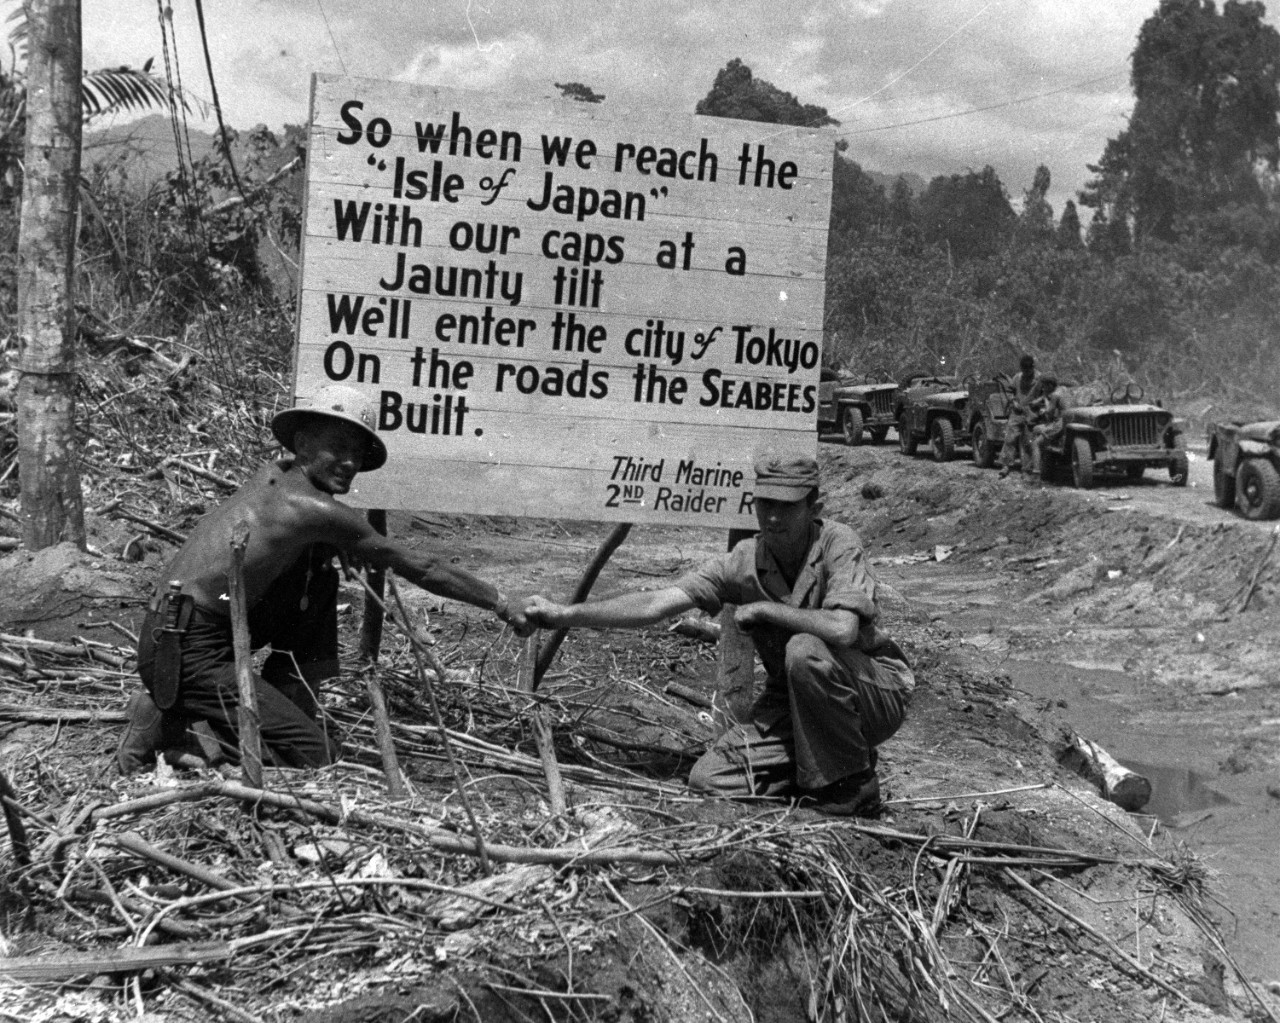 Seabees on the road to Tokyo